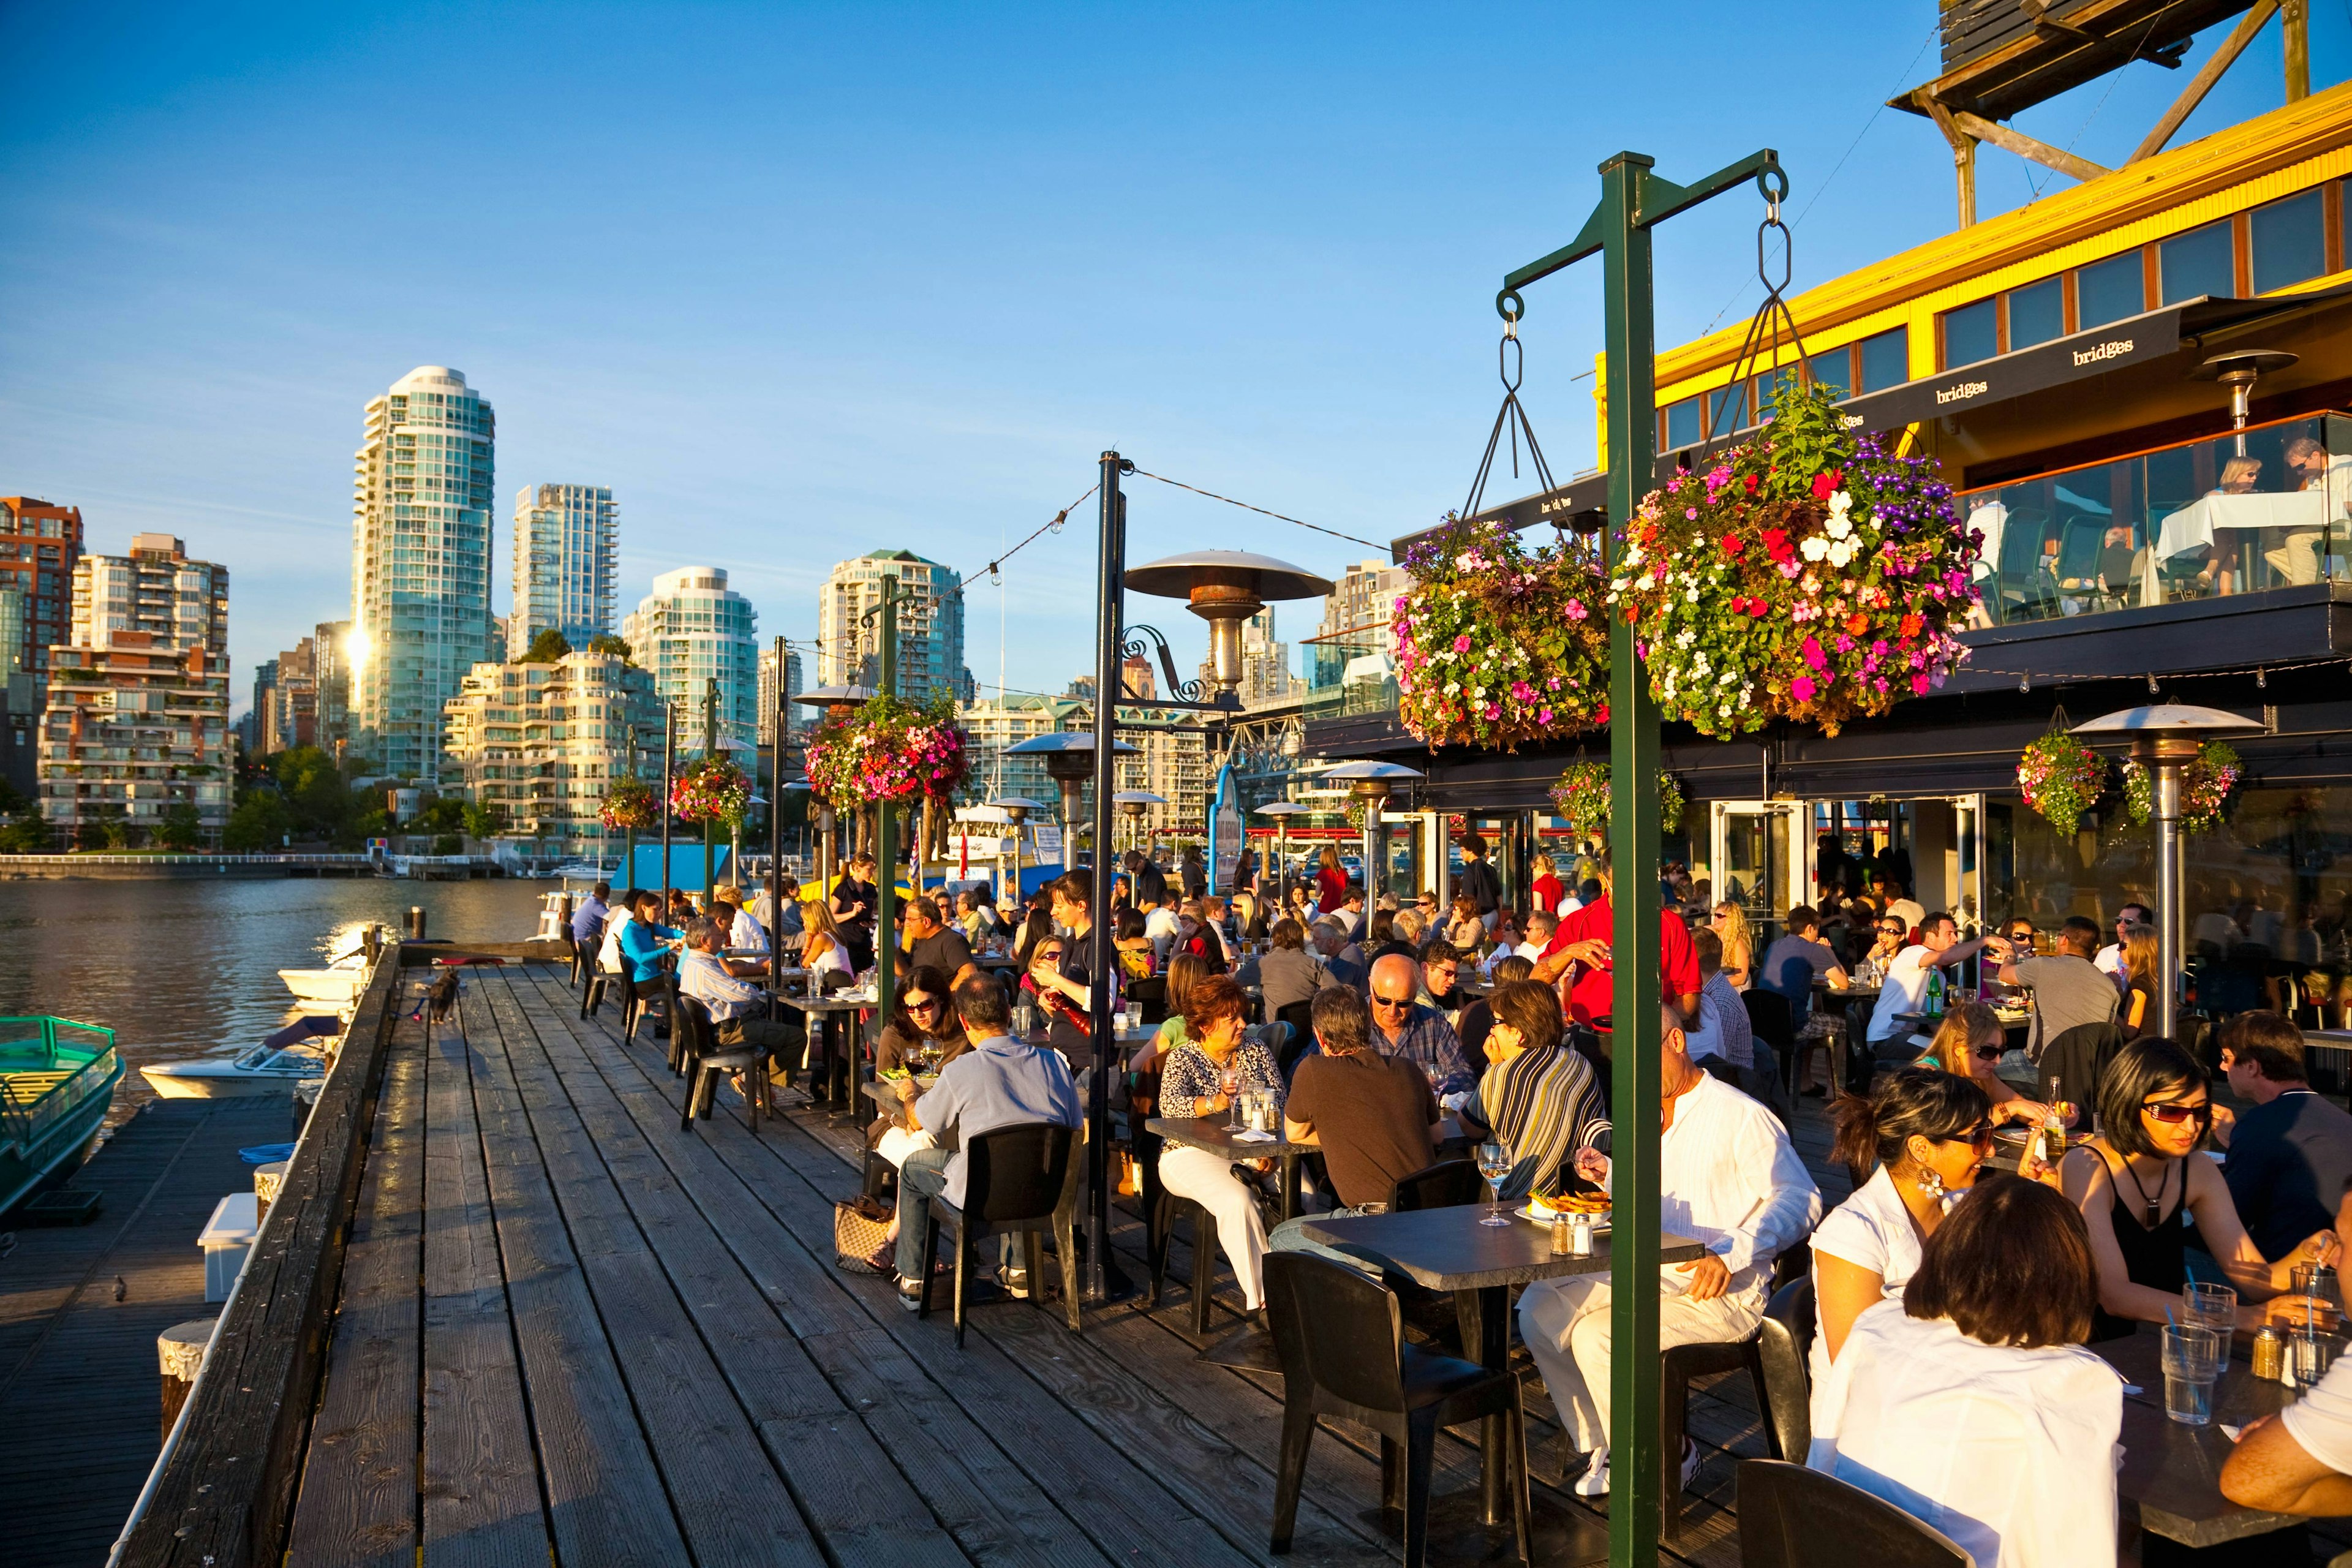 Alfresco dining on Granville Island, with Vancouver in the background. Image by Stuart Dee / The Image Bank / Getty